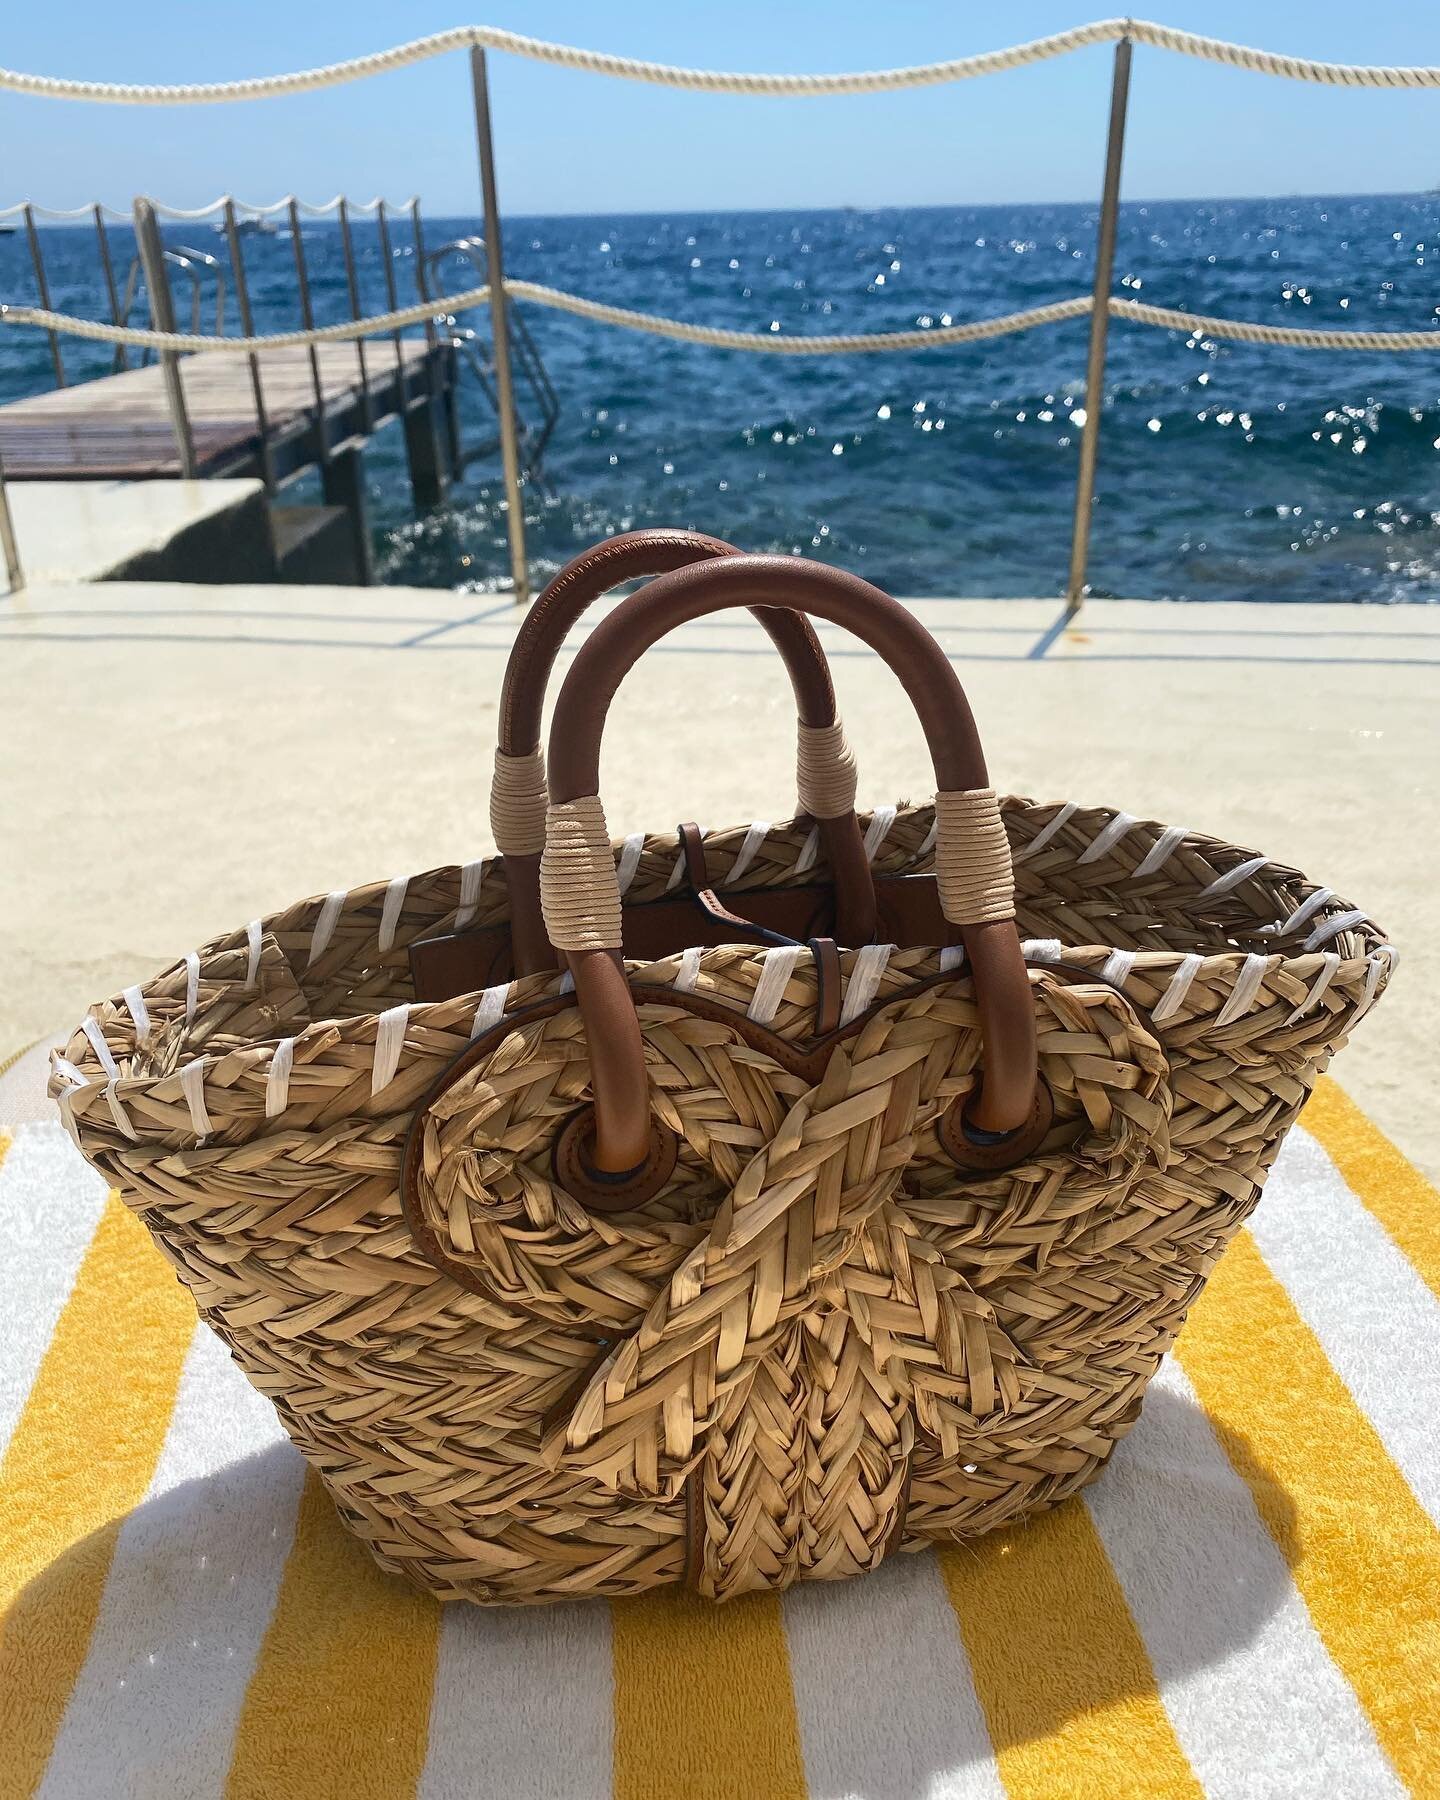 Yellow stripes and wicker baskets 💛@anyahindmarch @hotelilpellicano #VoyagerVibes #MyVacationStylist #ItaliansDoItBetter